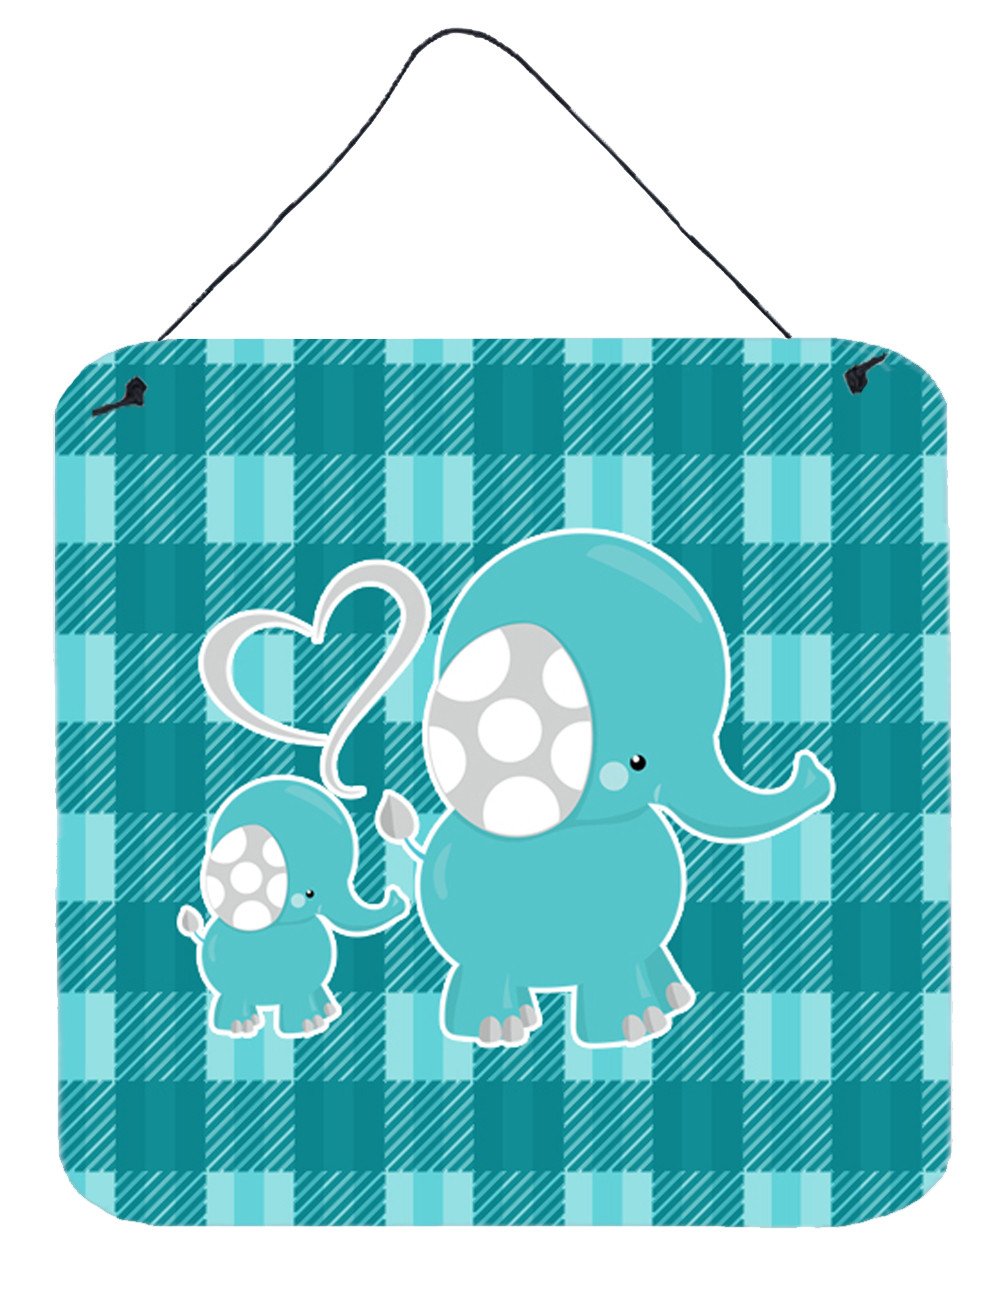 Plaid Momma and Baby Elephant Wall or Door Hanging Prints BB6839DS66 by Caroline's Treasures